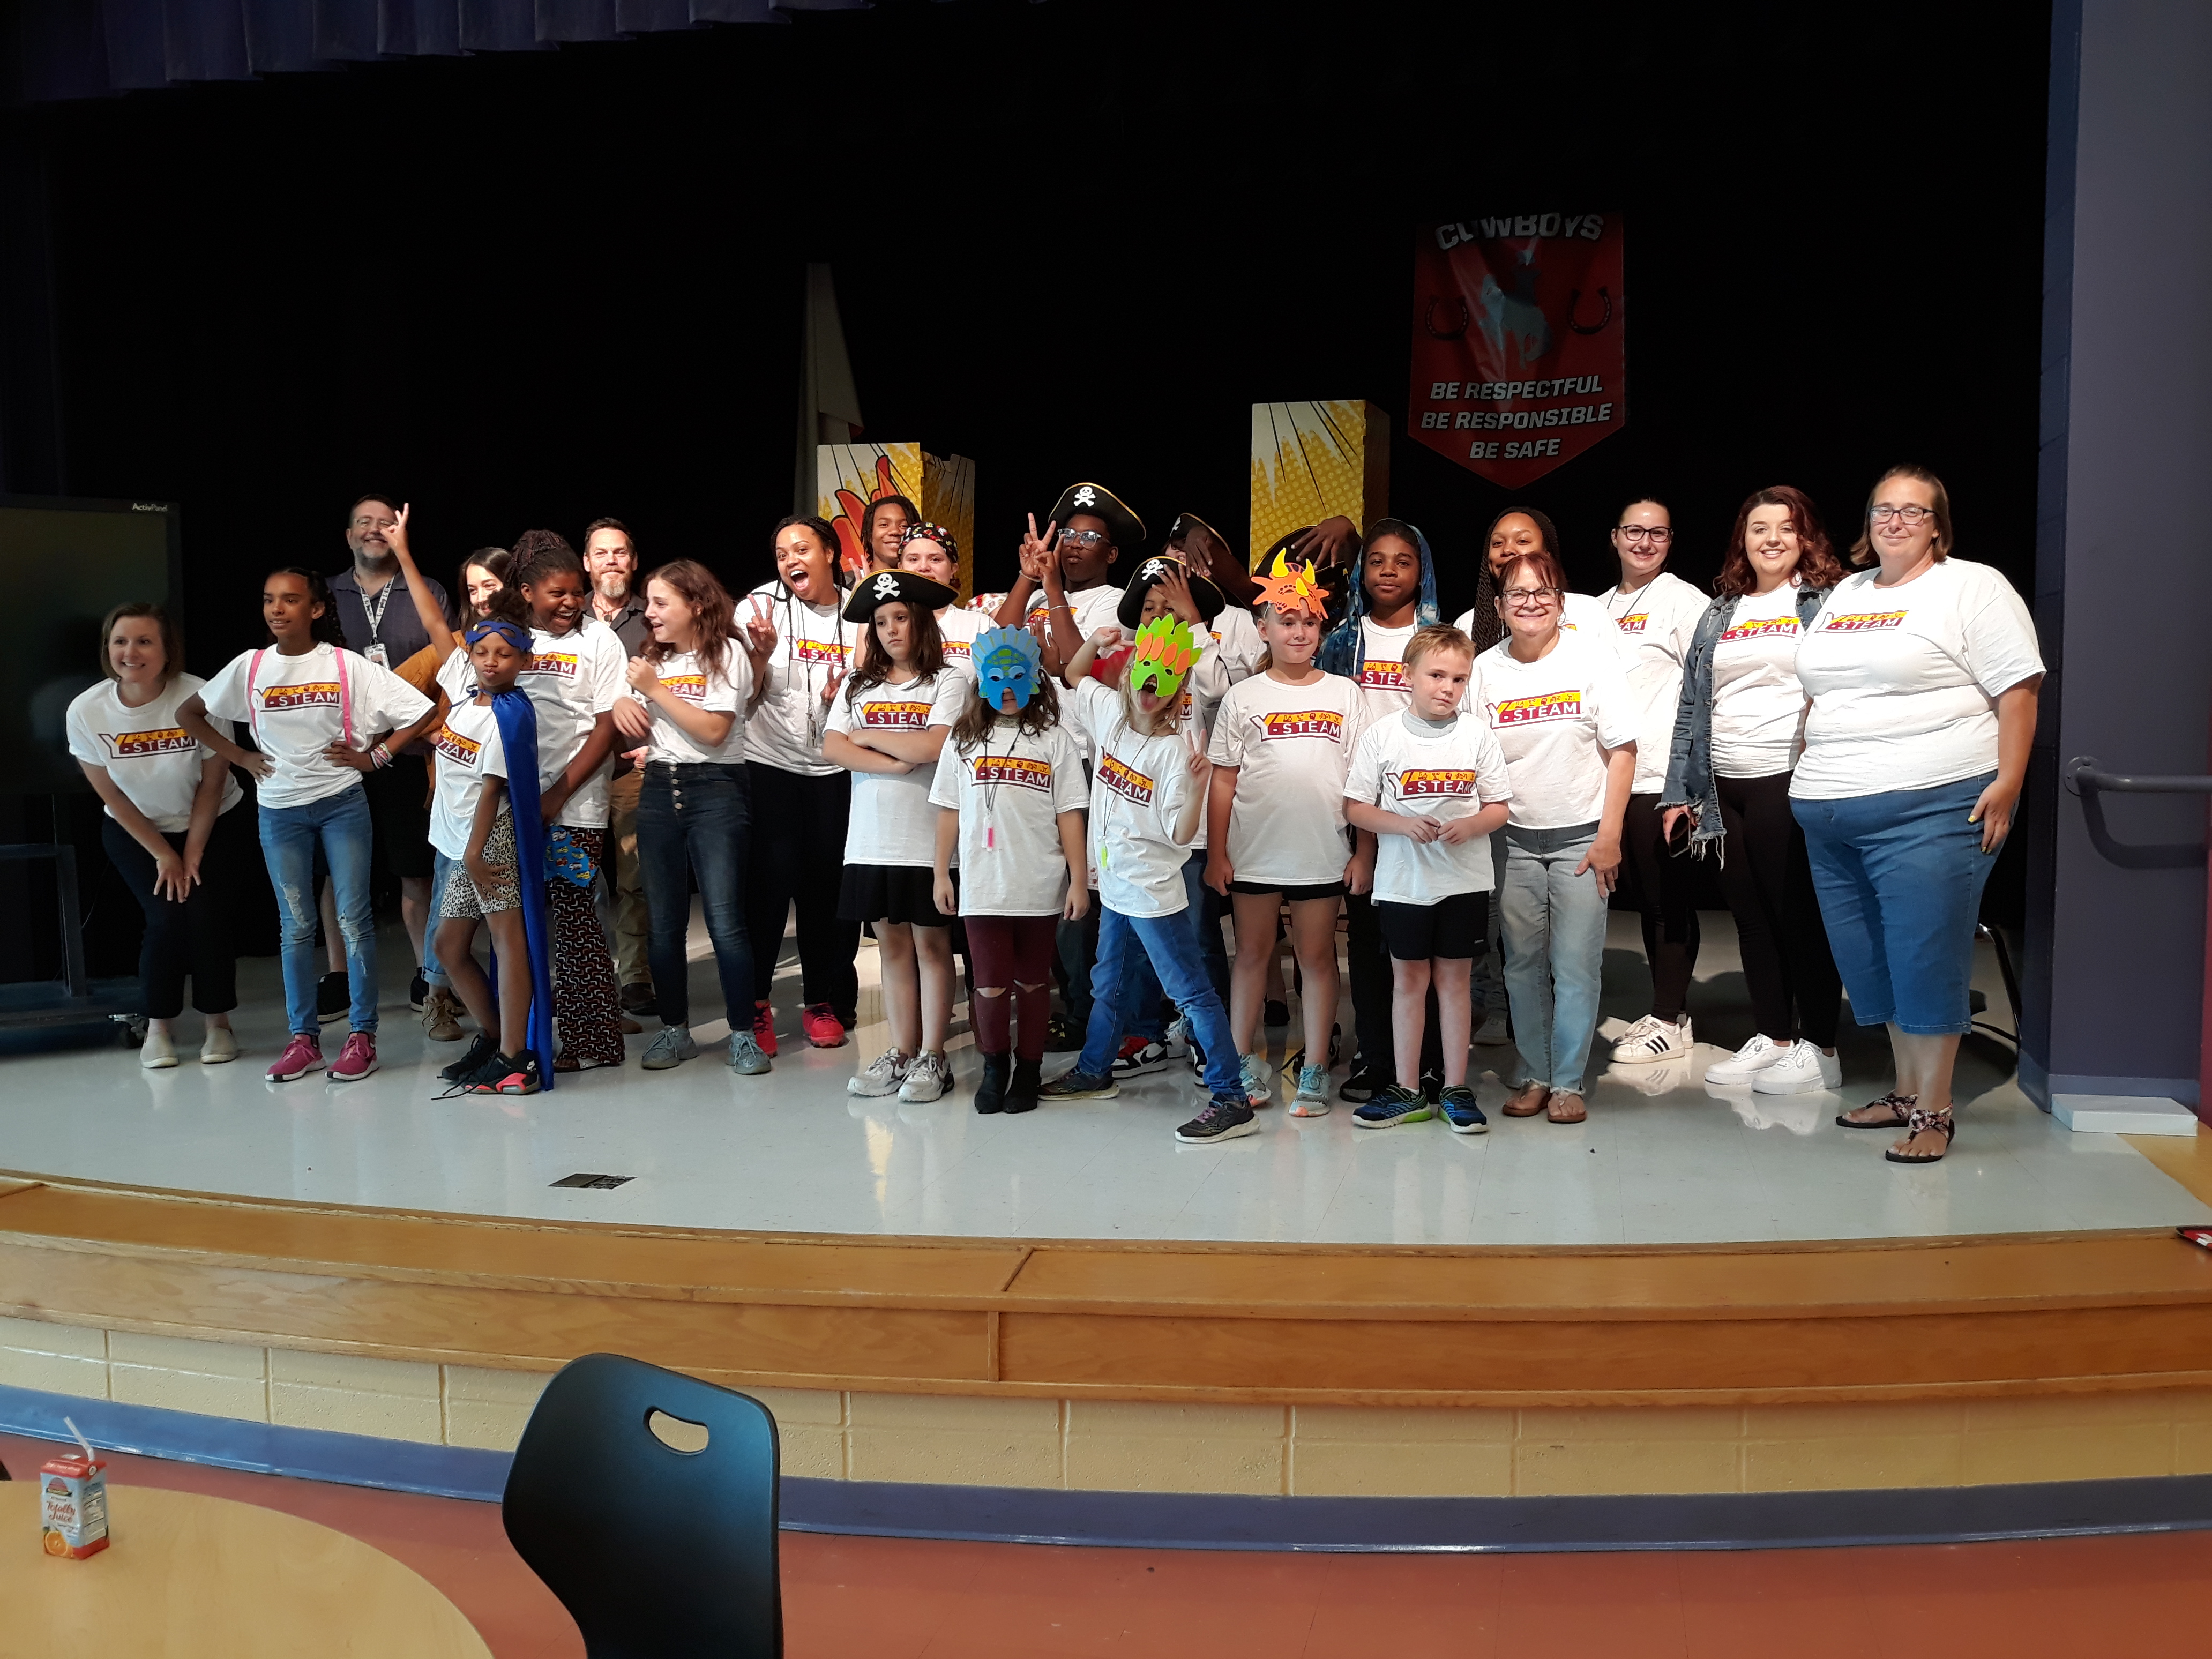 Photograph of Y-STEAM scholars on a stage wearing Y-STEAM t-shirts